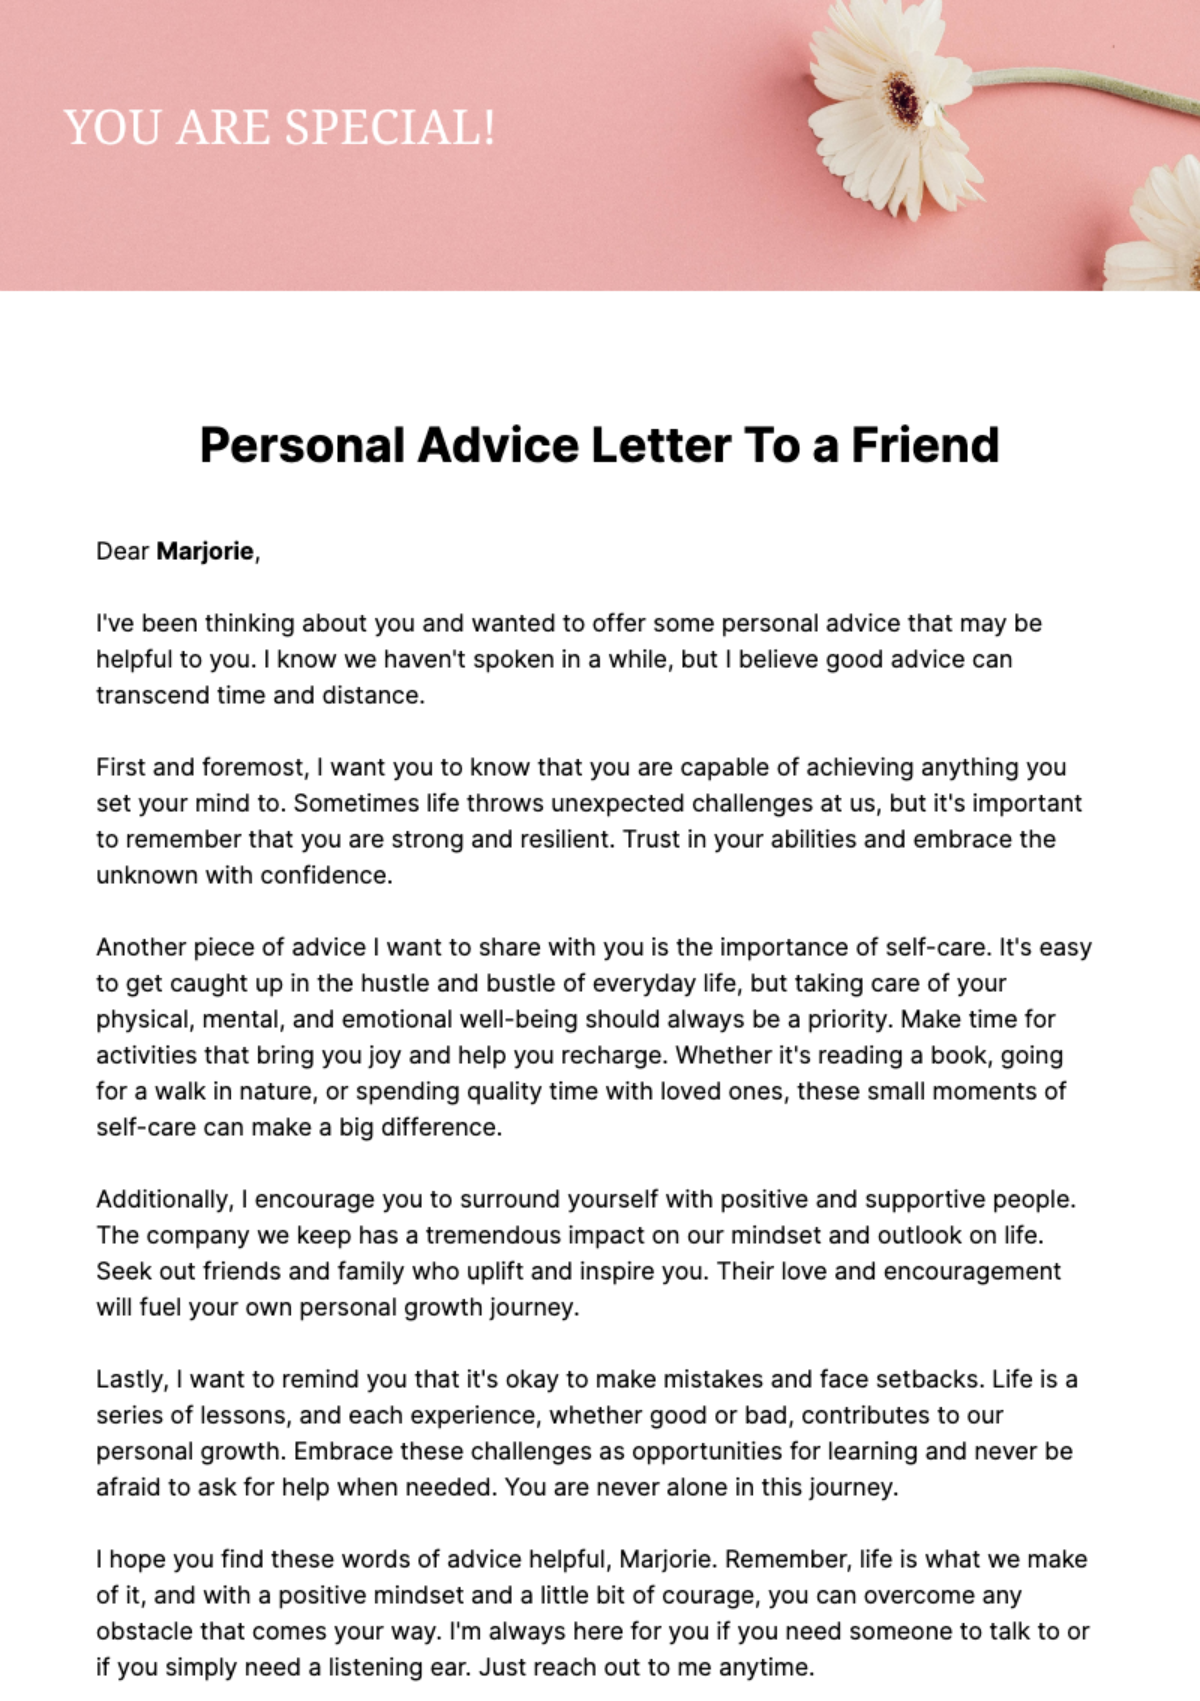 Free Personal Advice Letter to a Friend  Template